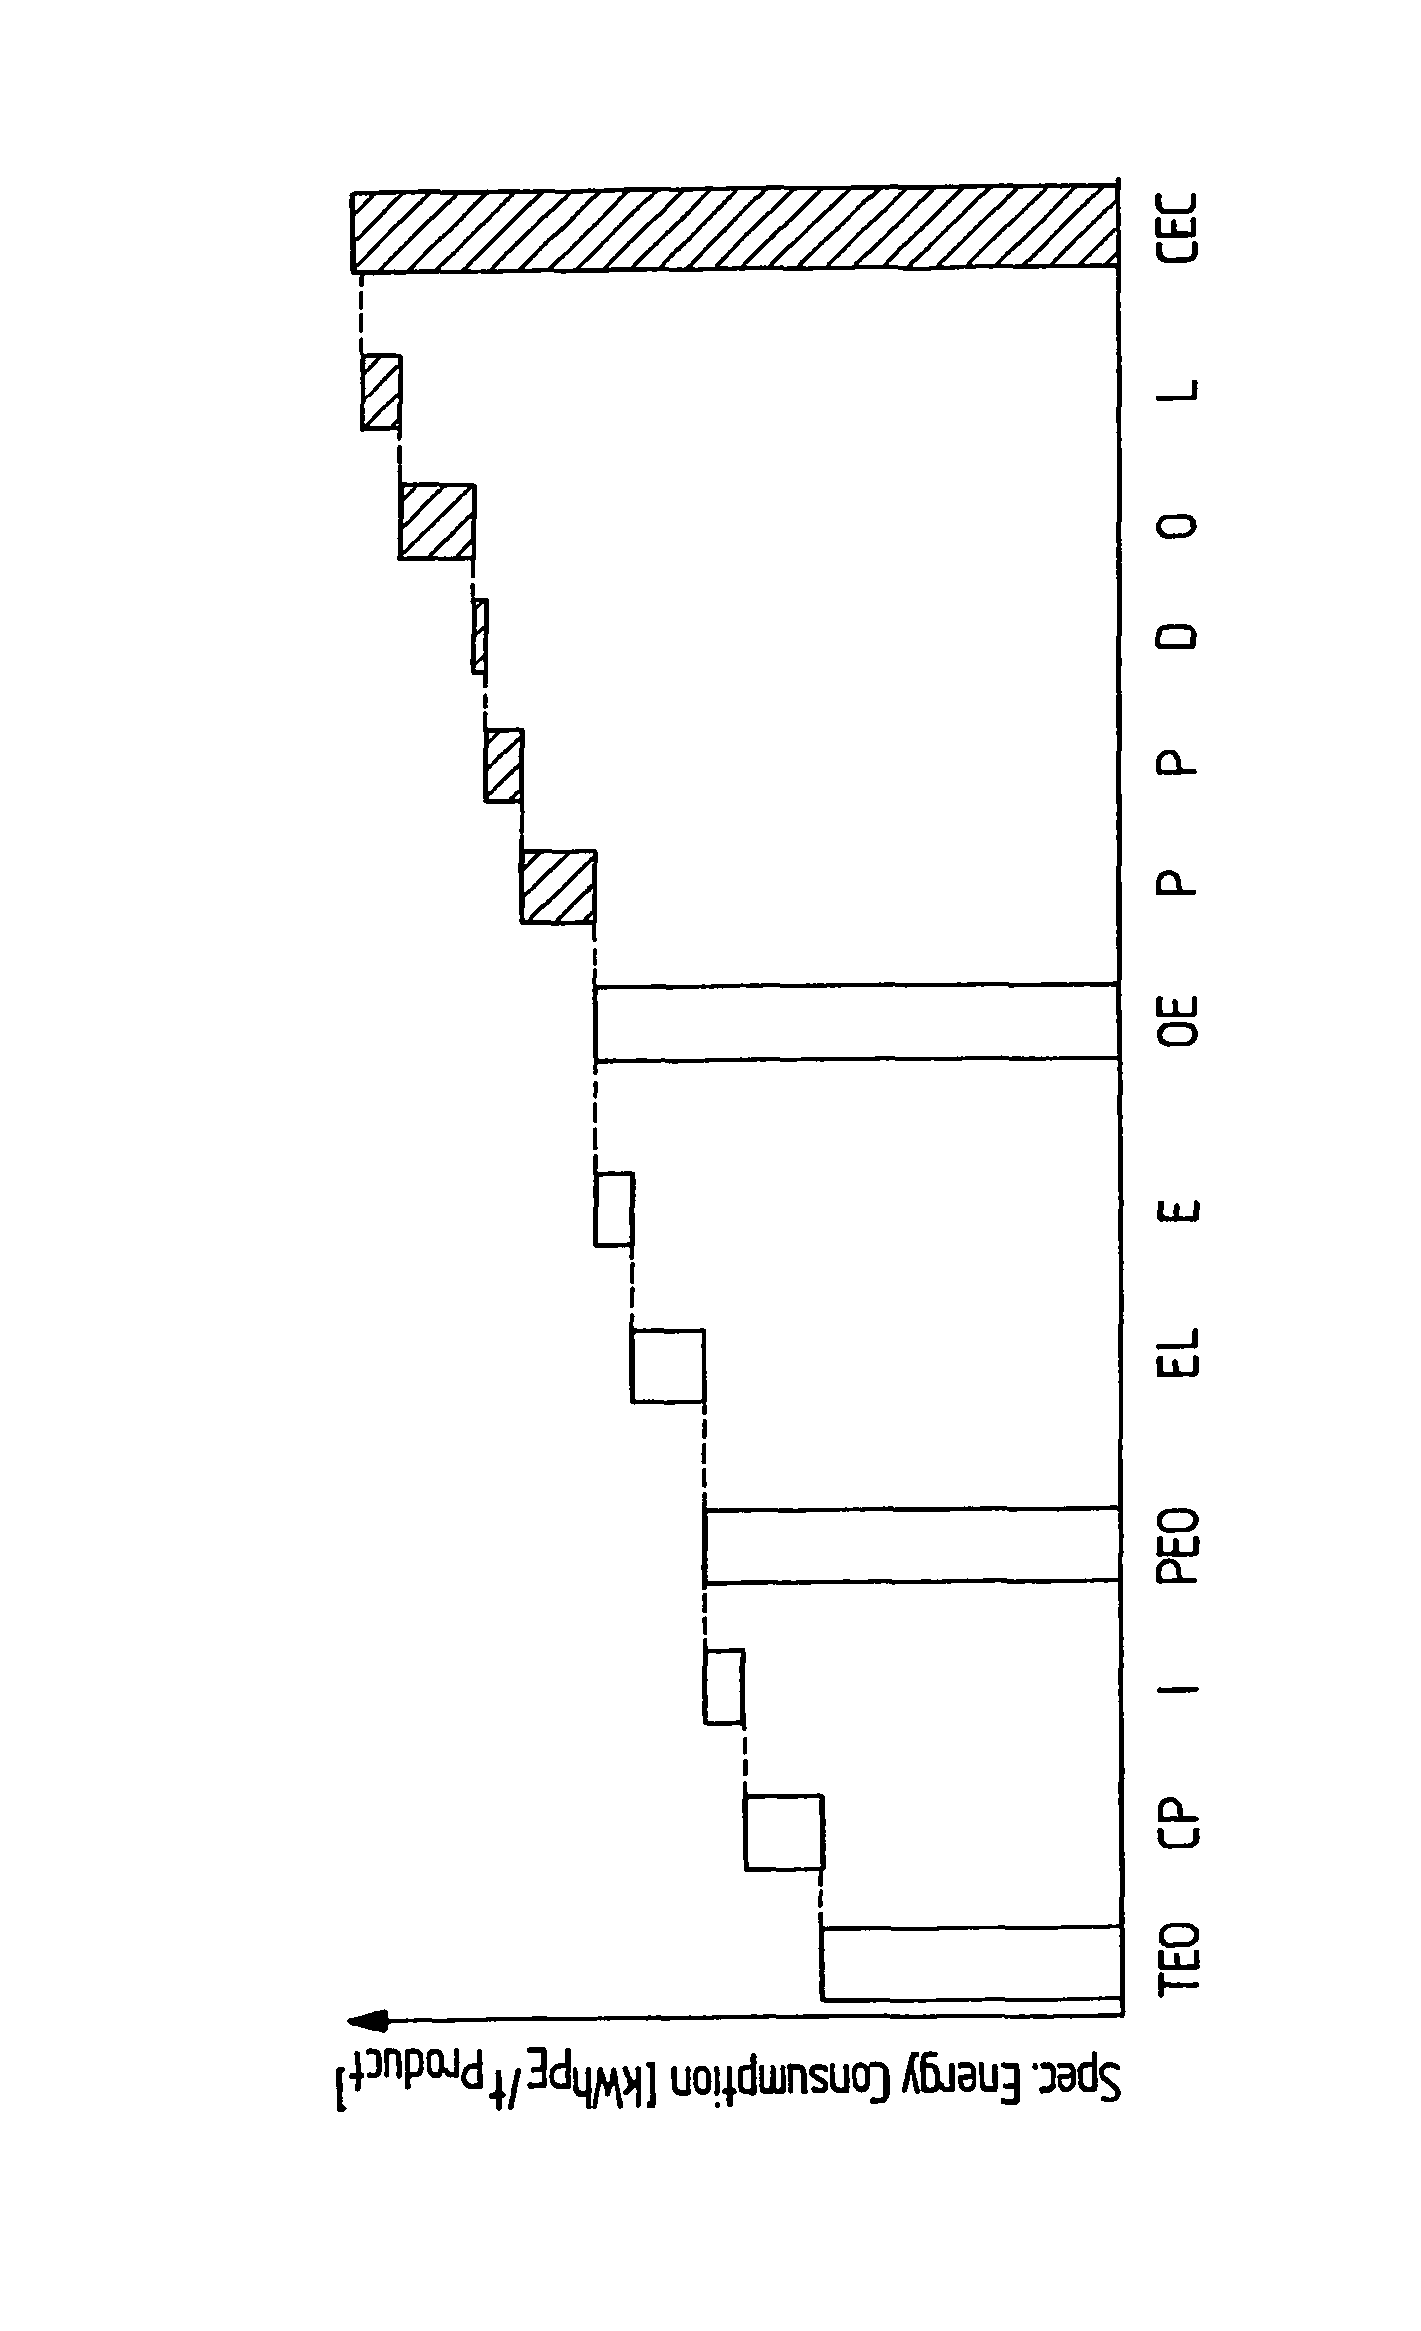 Method and system for monitoring and analyzing energy consumption in operated chemical plants